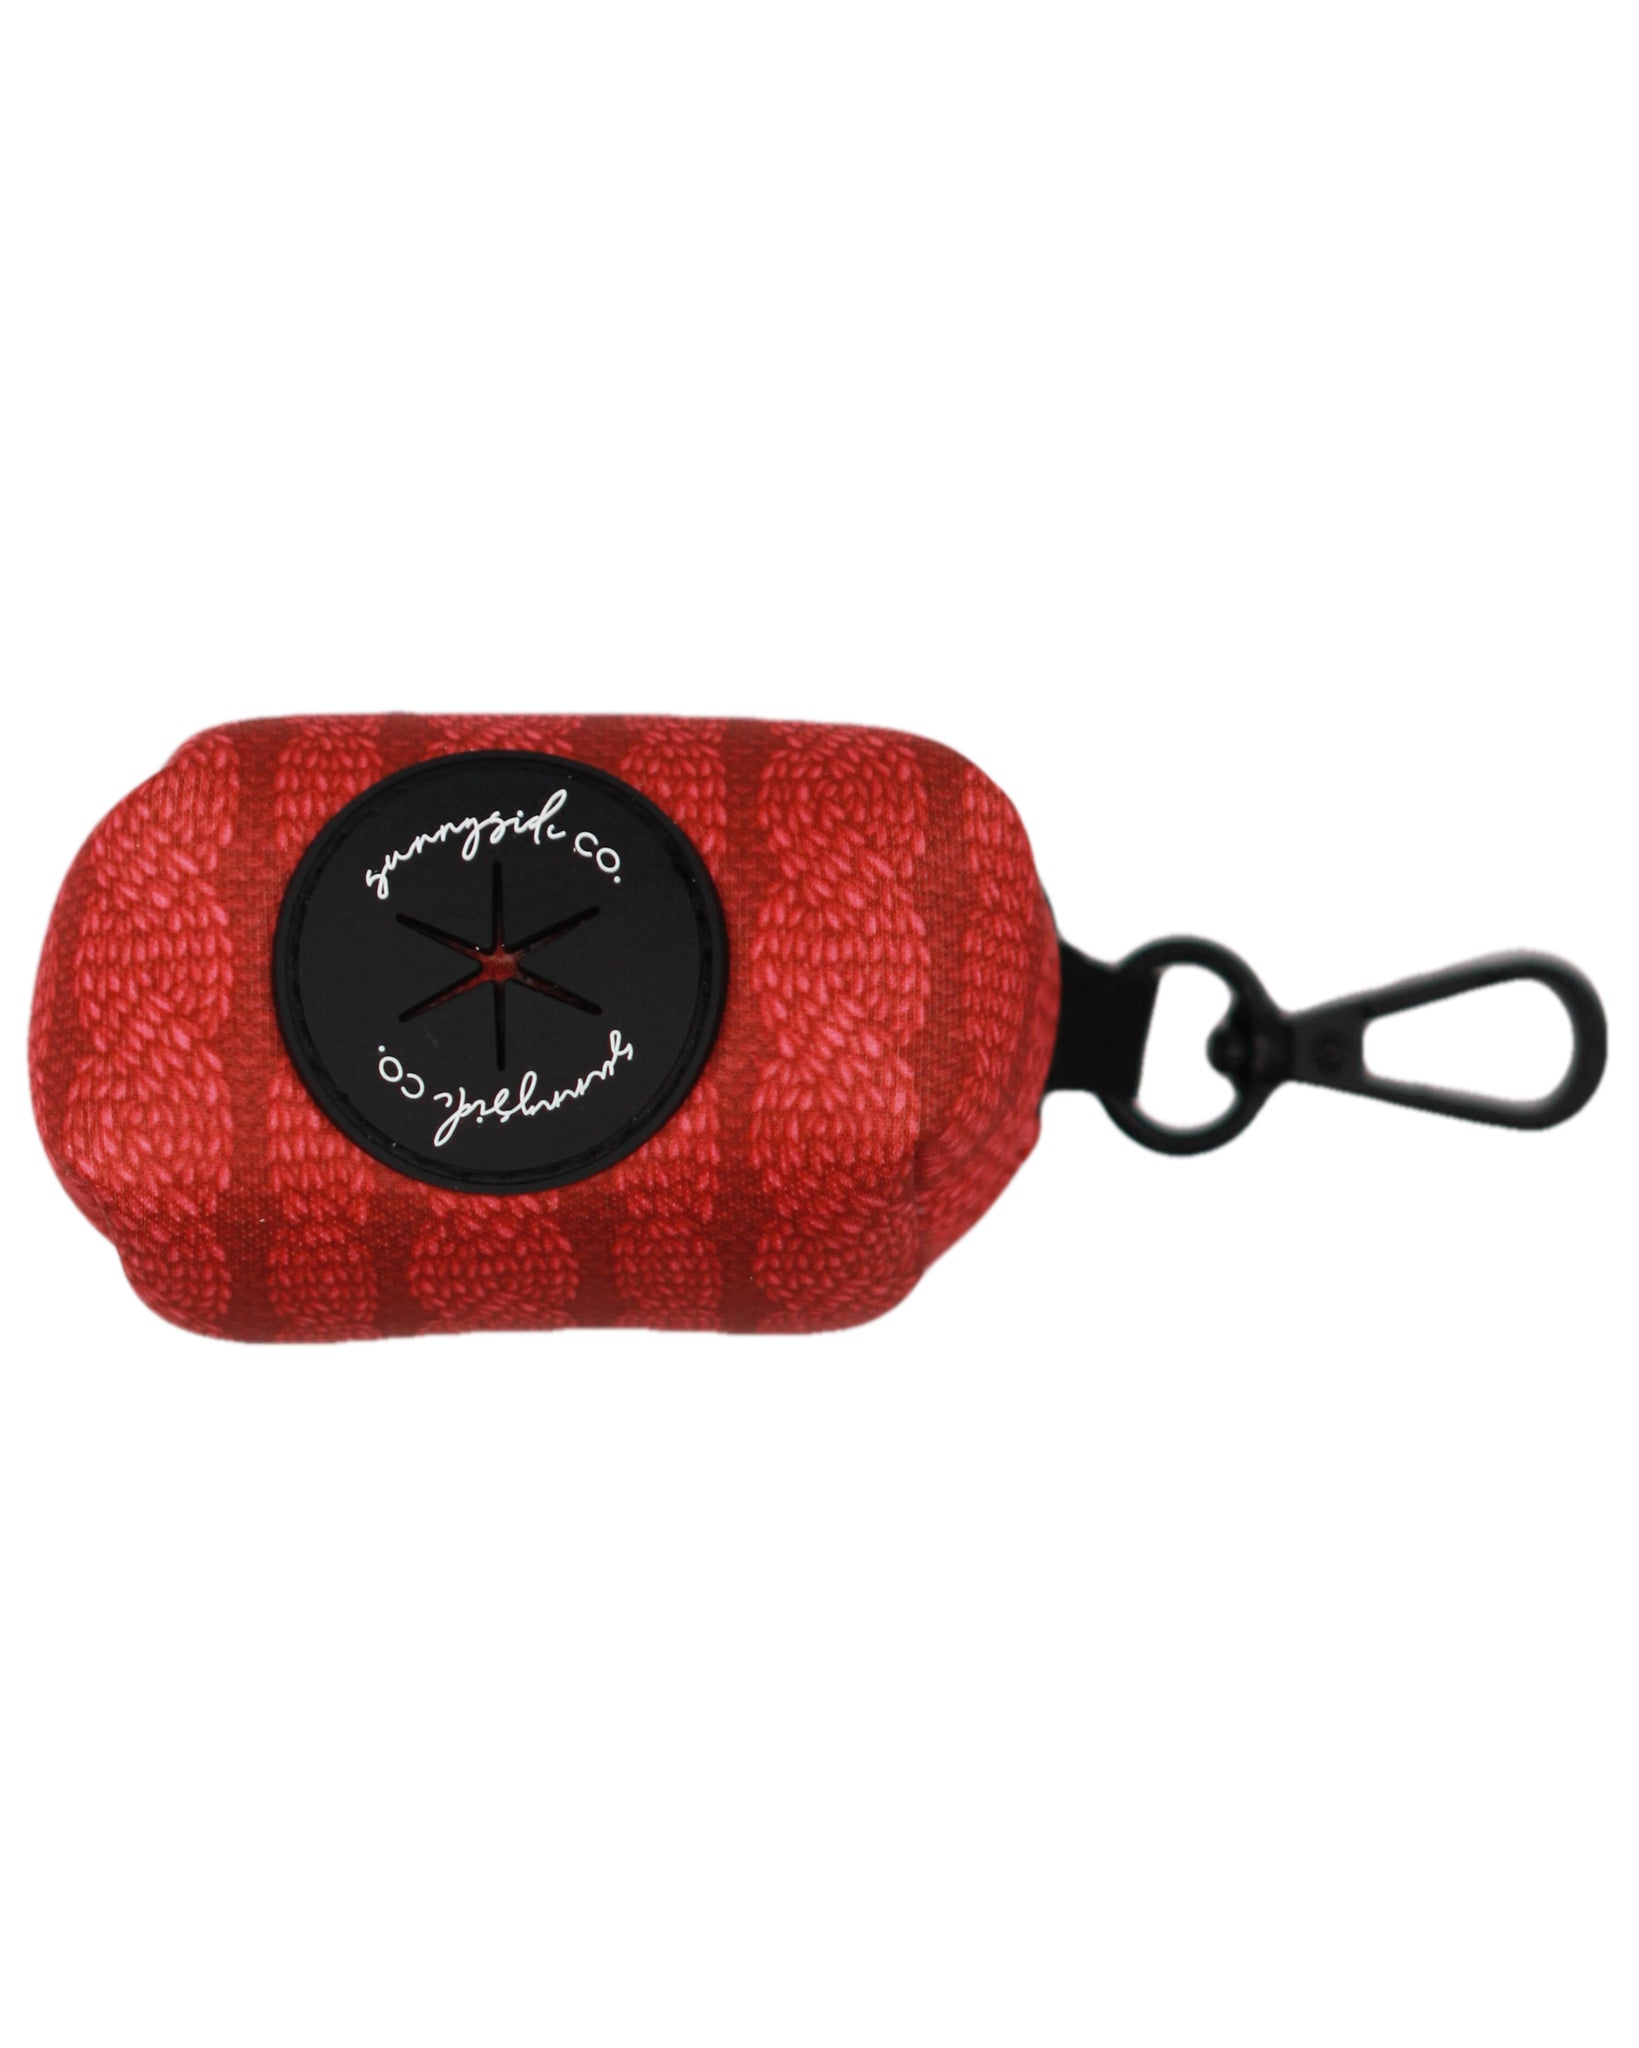 Poo Bag Holder - Stitched with Love - BERRY RED